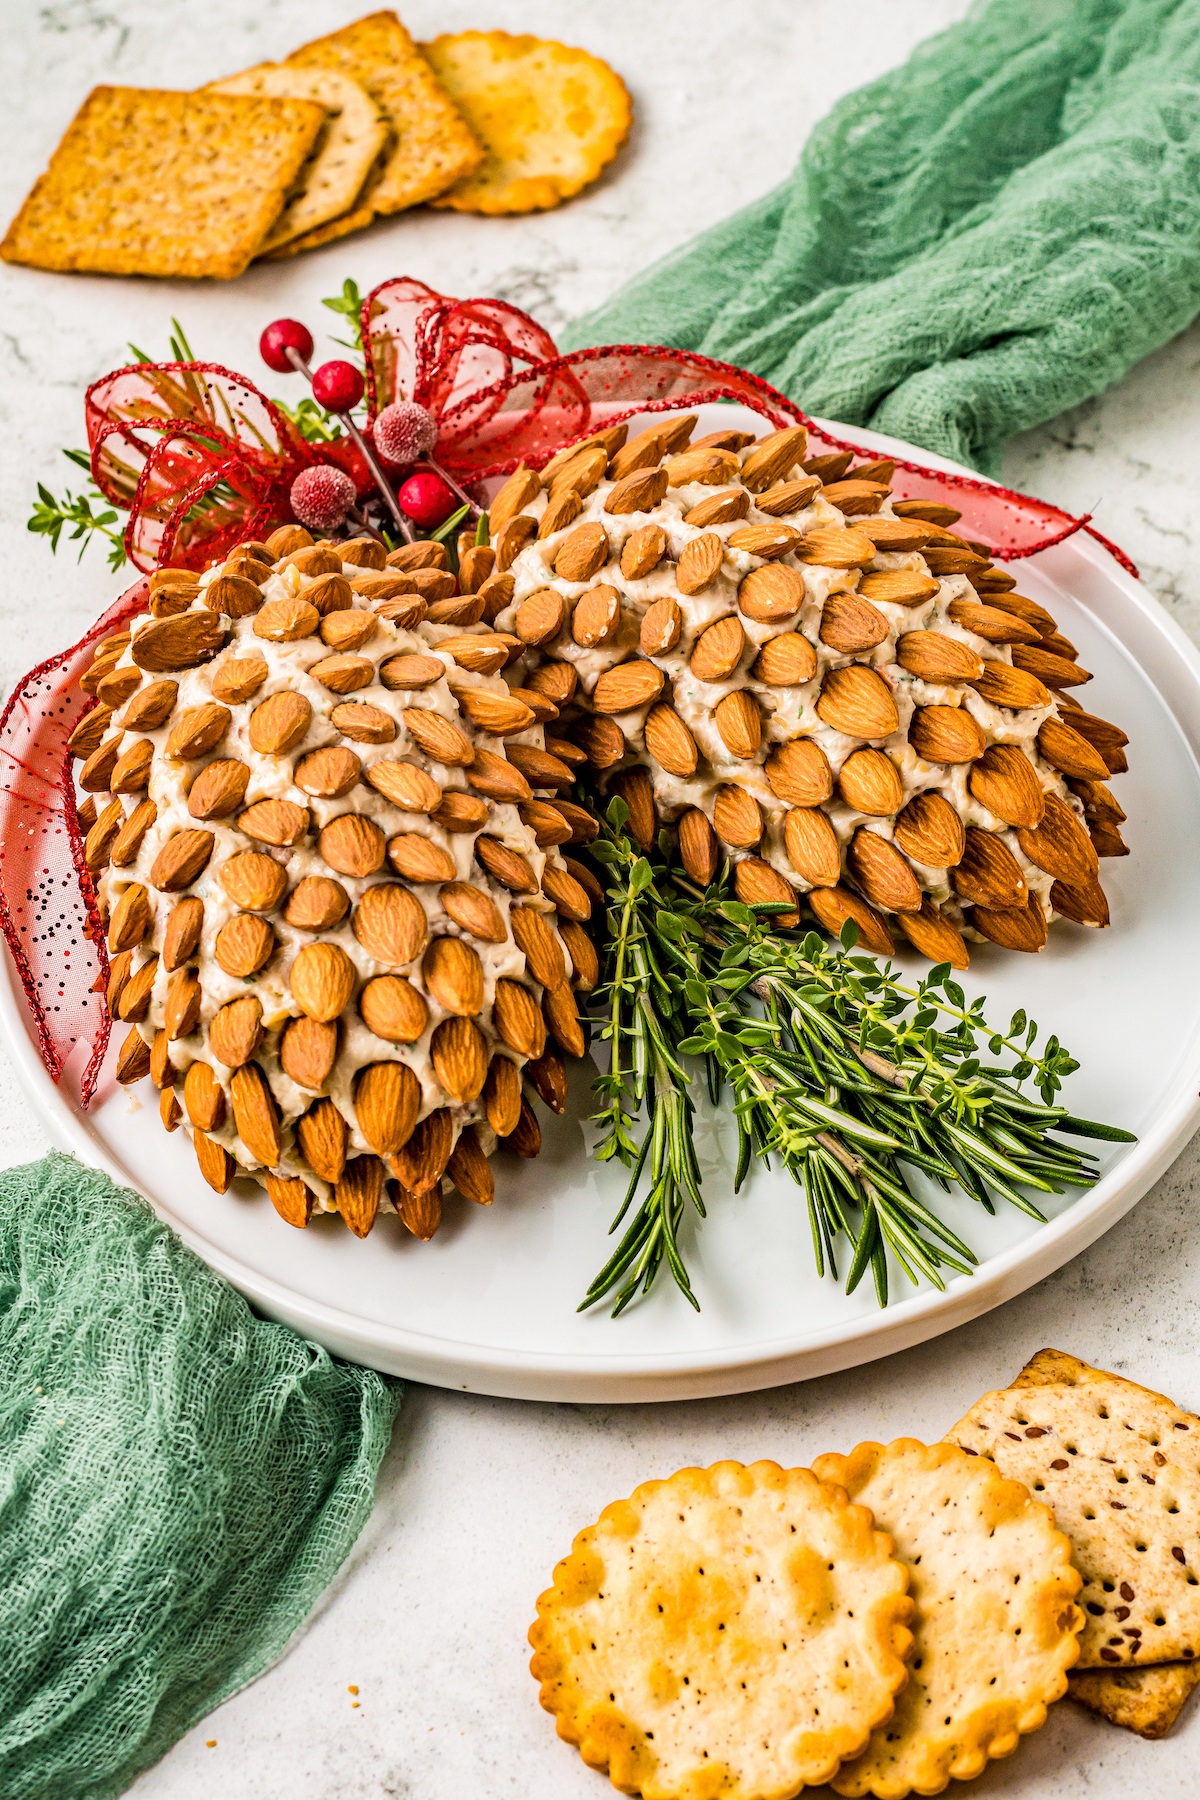 A platter with two cheese balls shaped like pinecones, with crackers and a green cloth napkin.